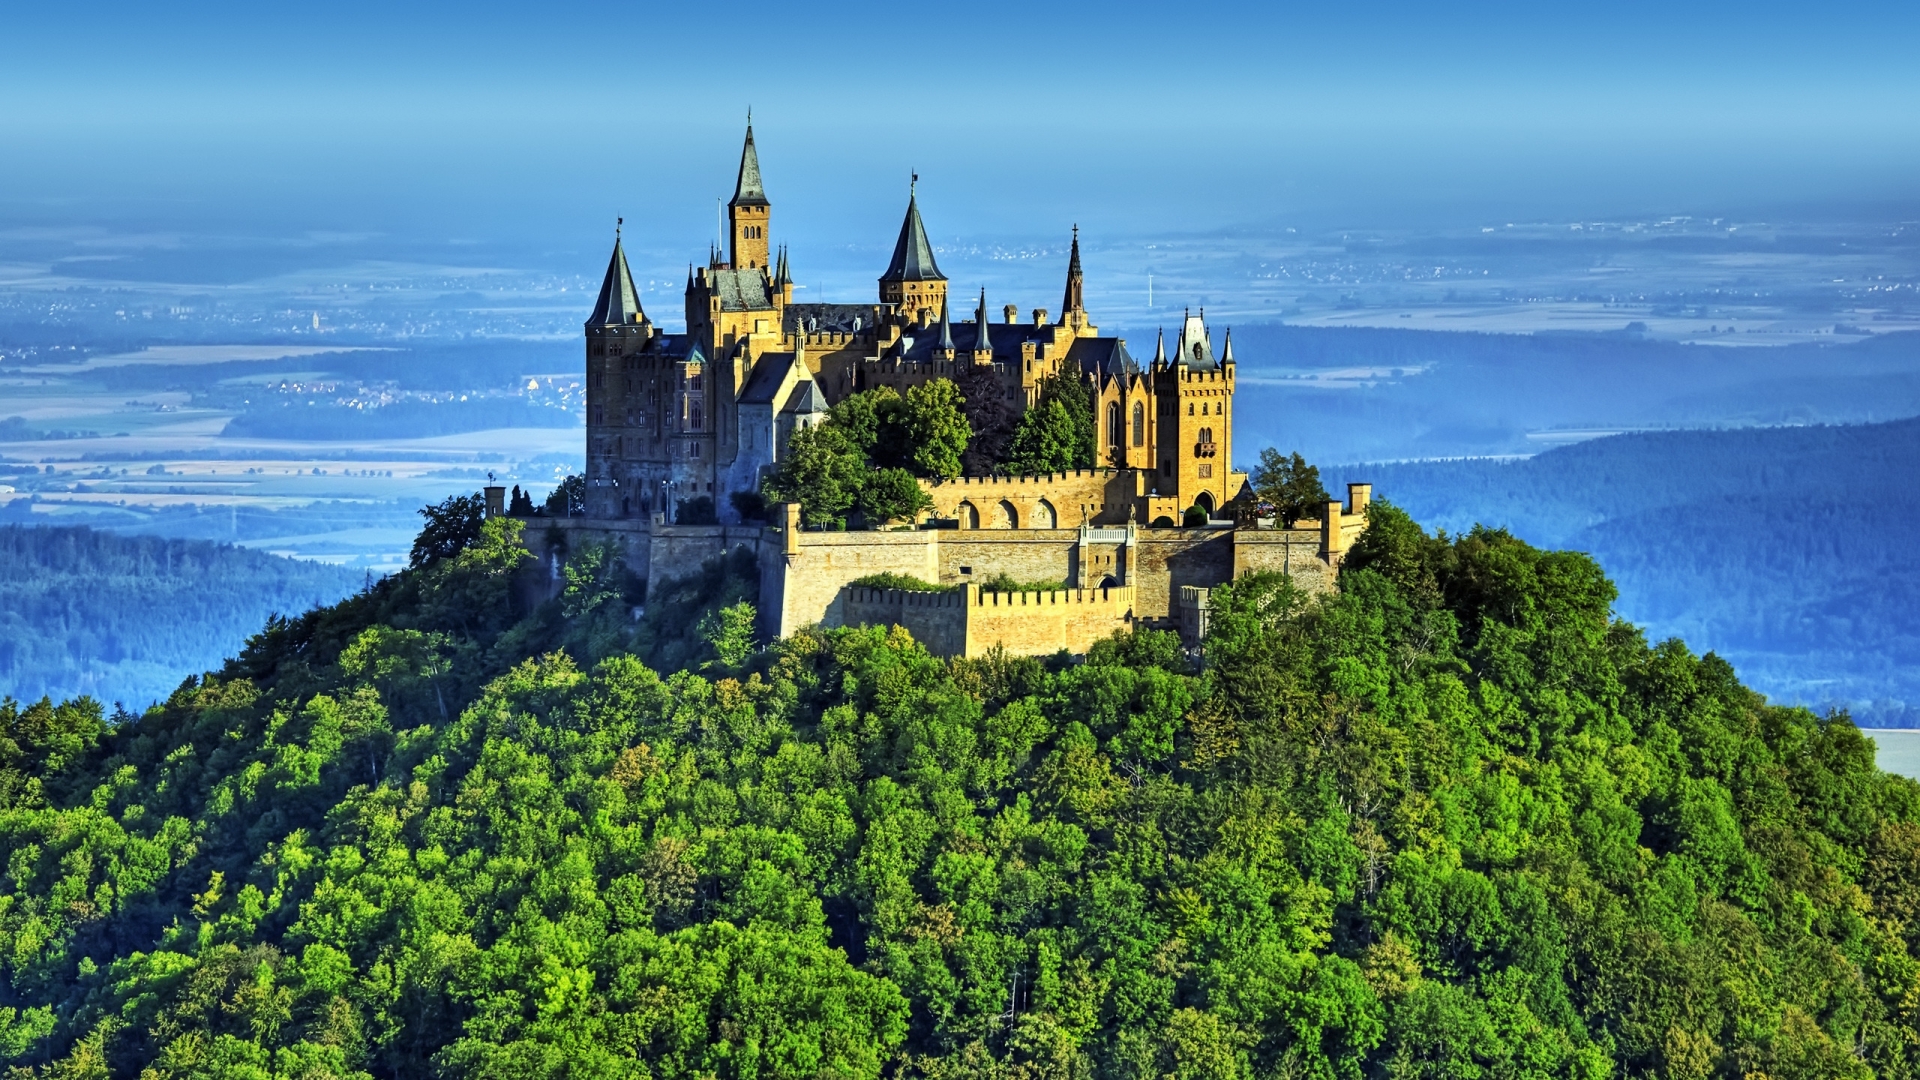 Amazing Castle for 1920 x 1080 HDTV 1080p resolution